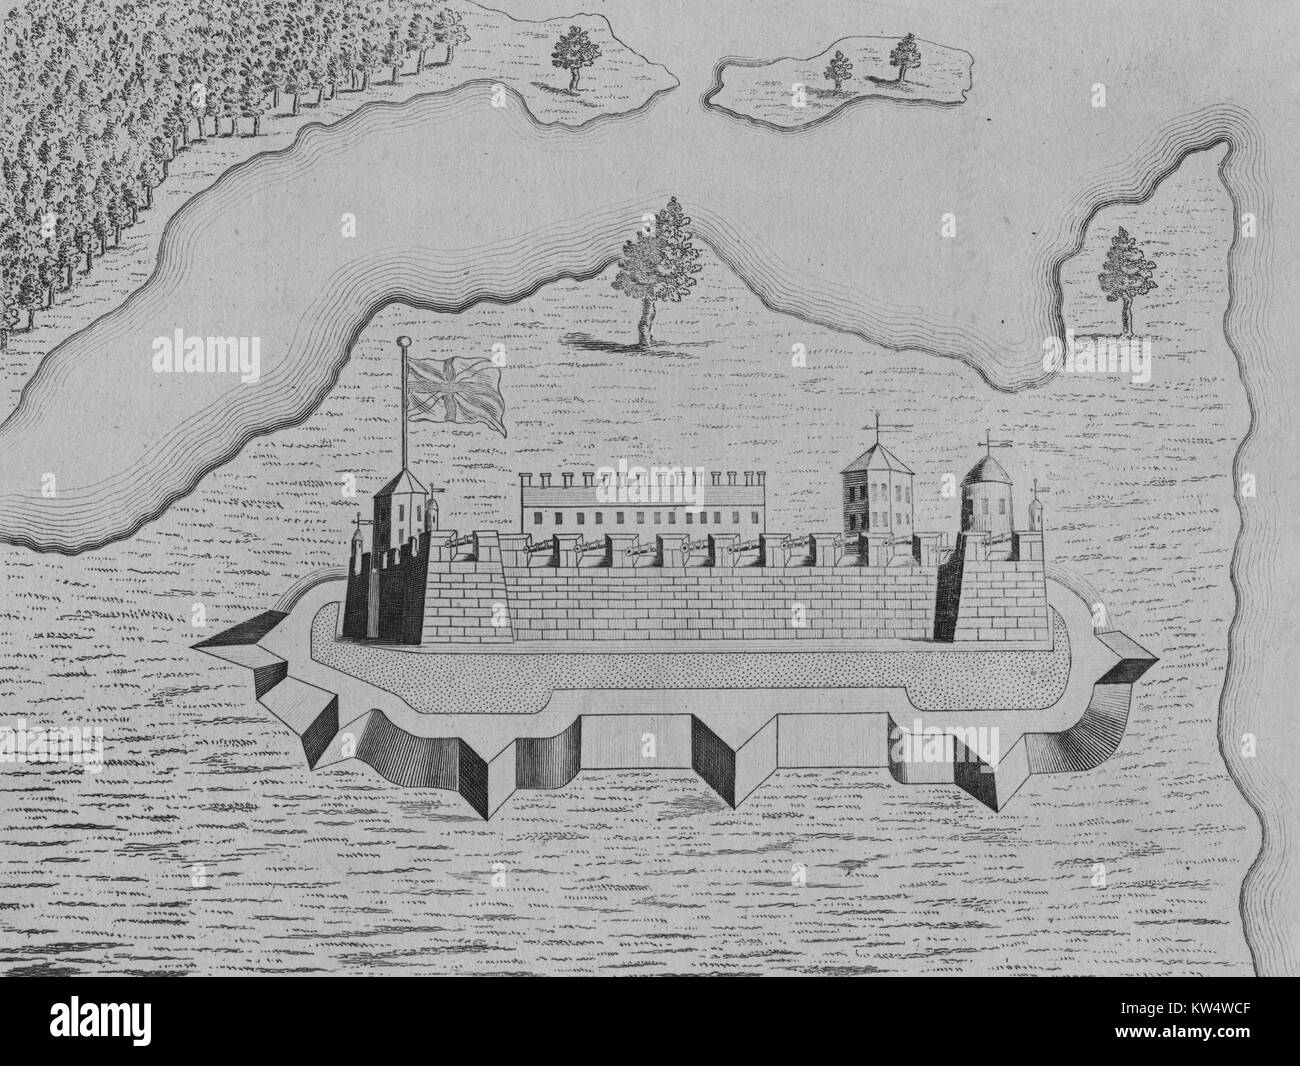 Illustration representing a French Fort Saint-Frederic built on Lake Champlain to secure the region against British colonization and control the lake, 1760. () Stock Photo